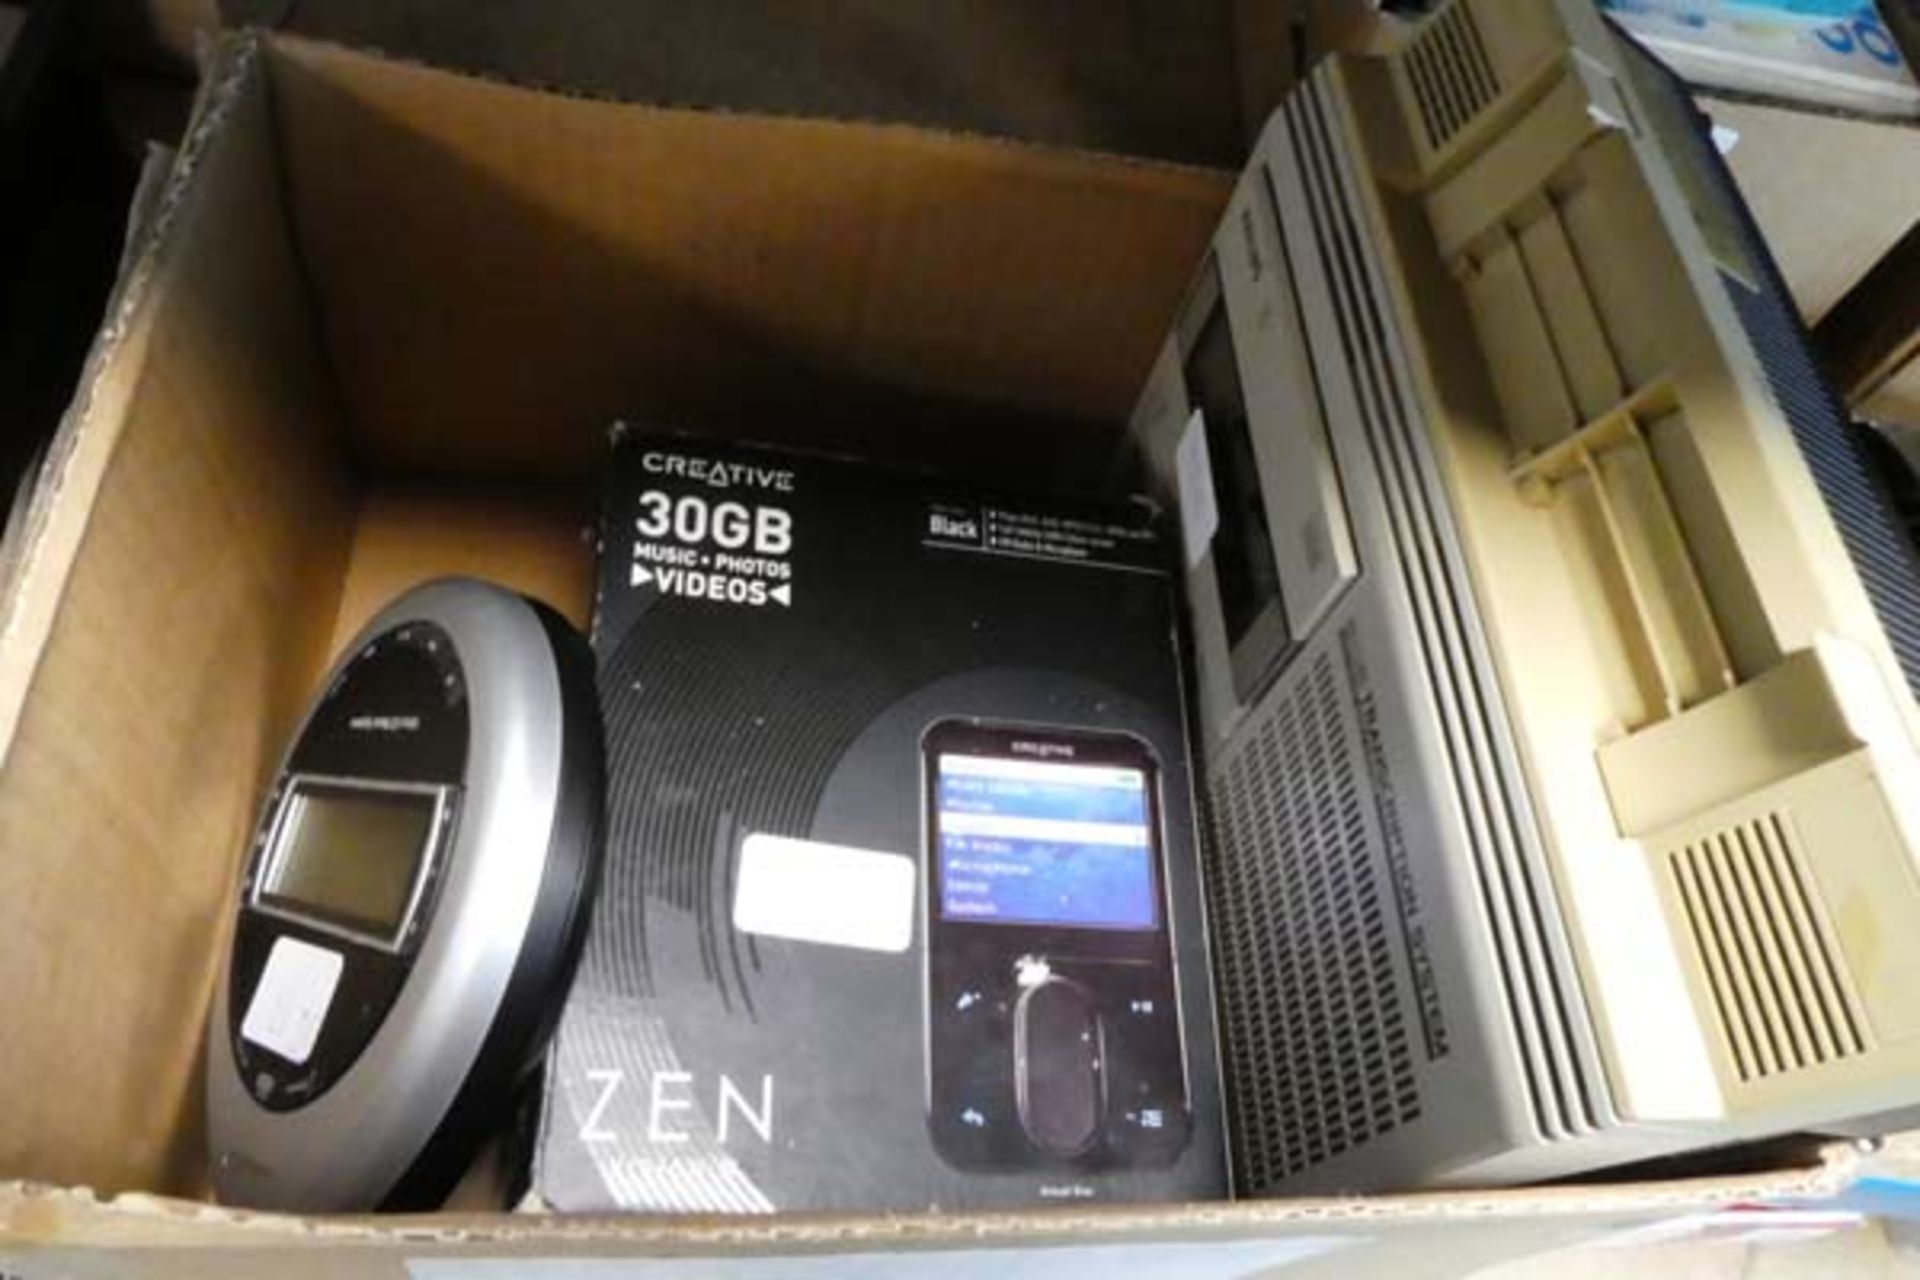 Philips 505 transcript system together with a Bose portable compact CD player and creative 30gb